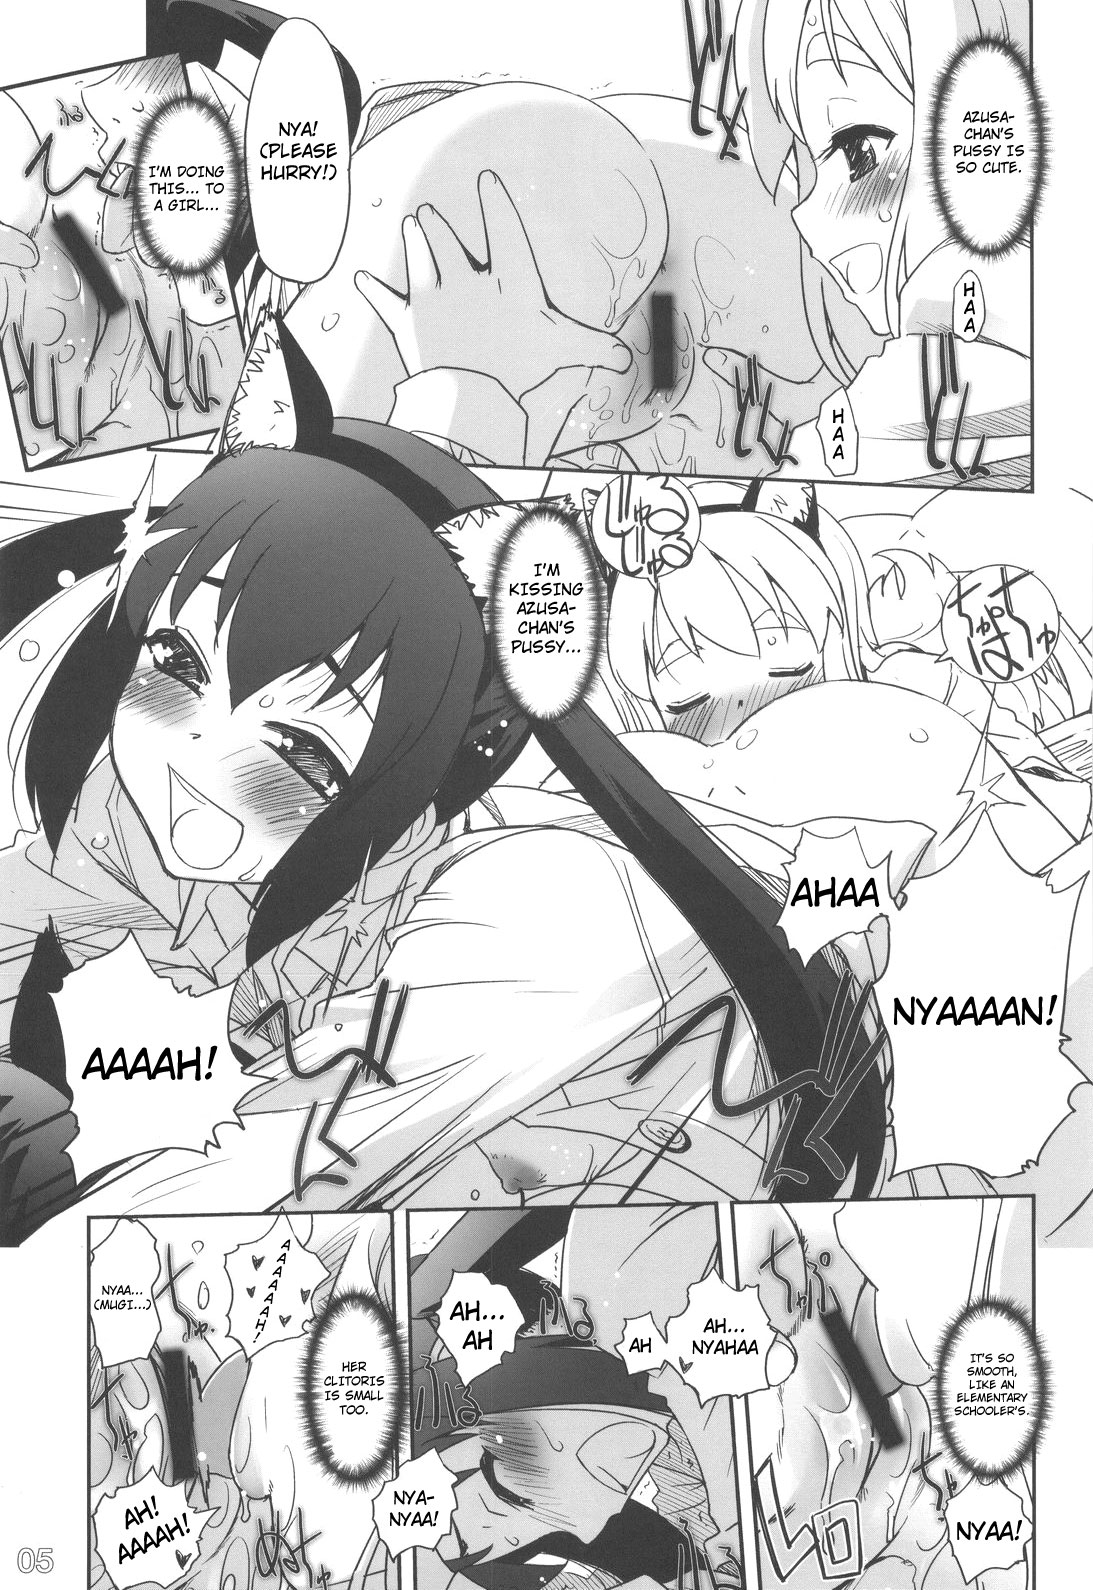 (C76) [G-Power! (Sasayuki)] Nekomimi to Toilet to Houkago no Bushitsu | Cat Ears And A Restroom And The Club Room After School (K-ON) [English] [Nicchiscans-4Dawgz] page 4 full